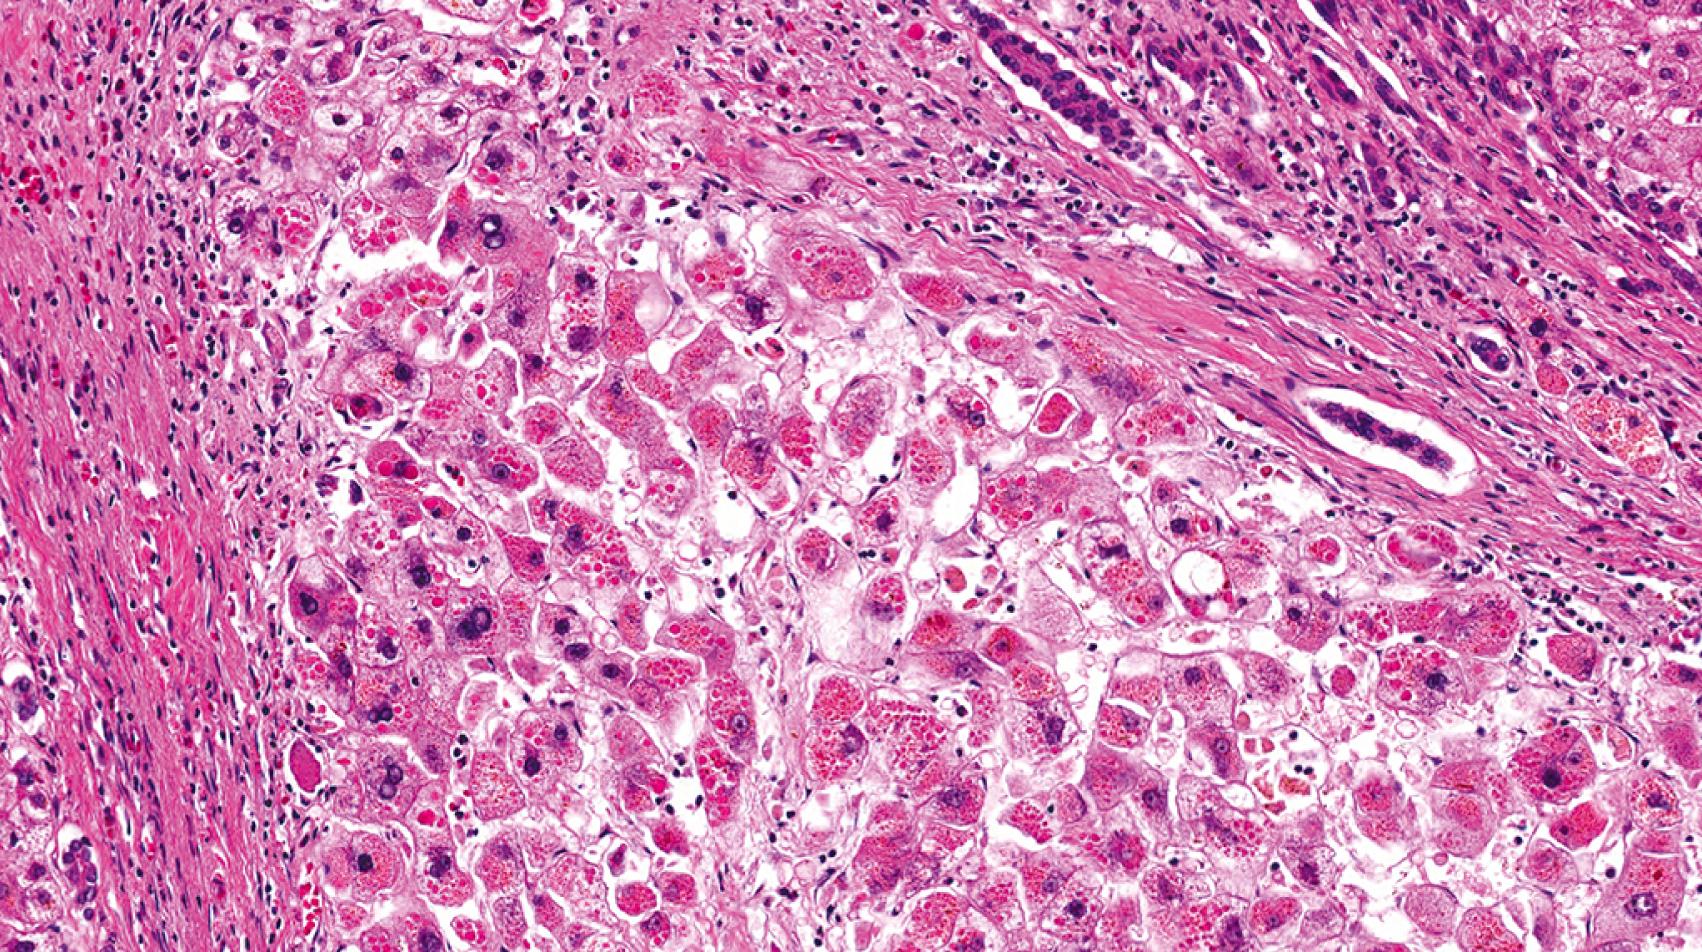 Fig. 66.6, Hematoxylin-and eosin-stained section revealing innumerable eosinophilic inclusions in the cytoplasm of hepatocytes.